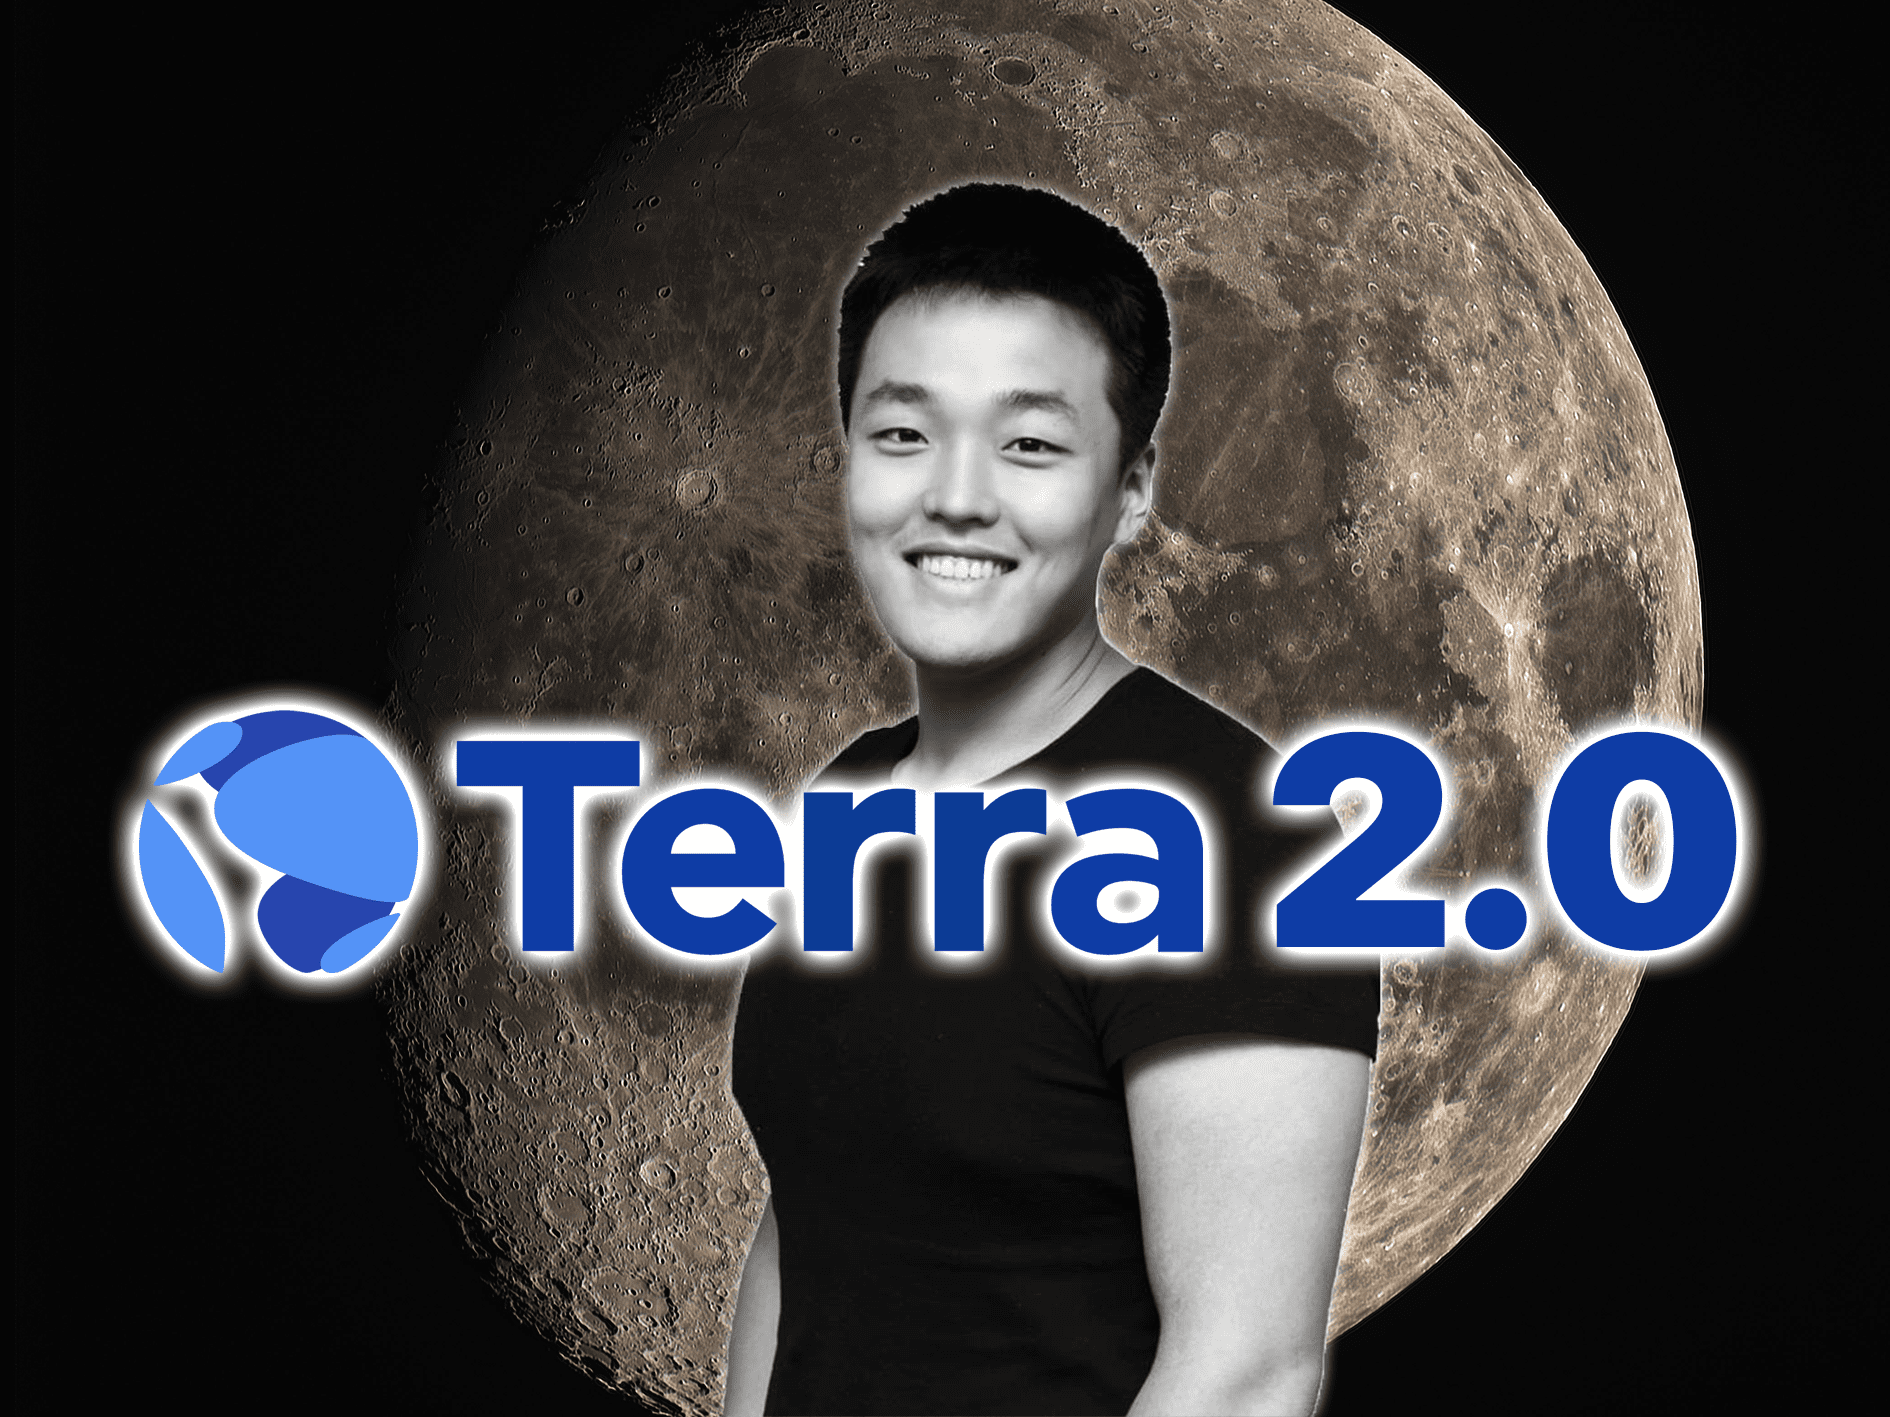 Winning back trust of Terra community a tall order for Do Kwon: Experts